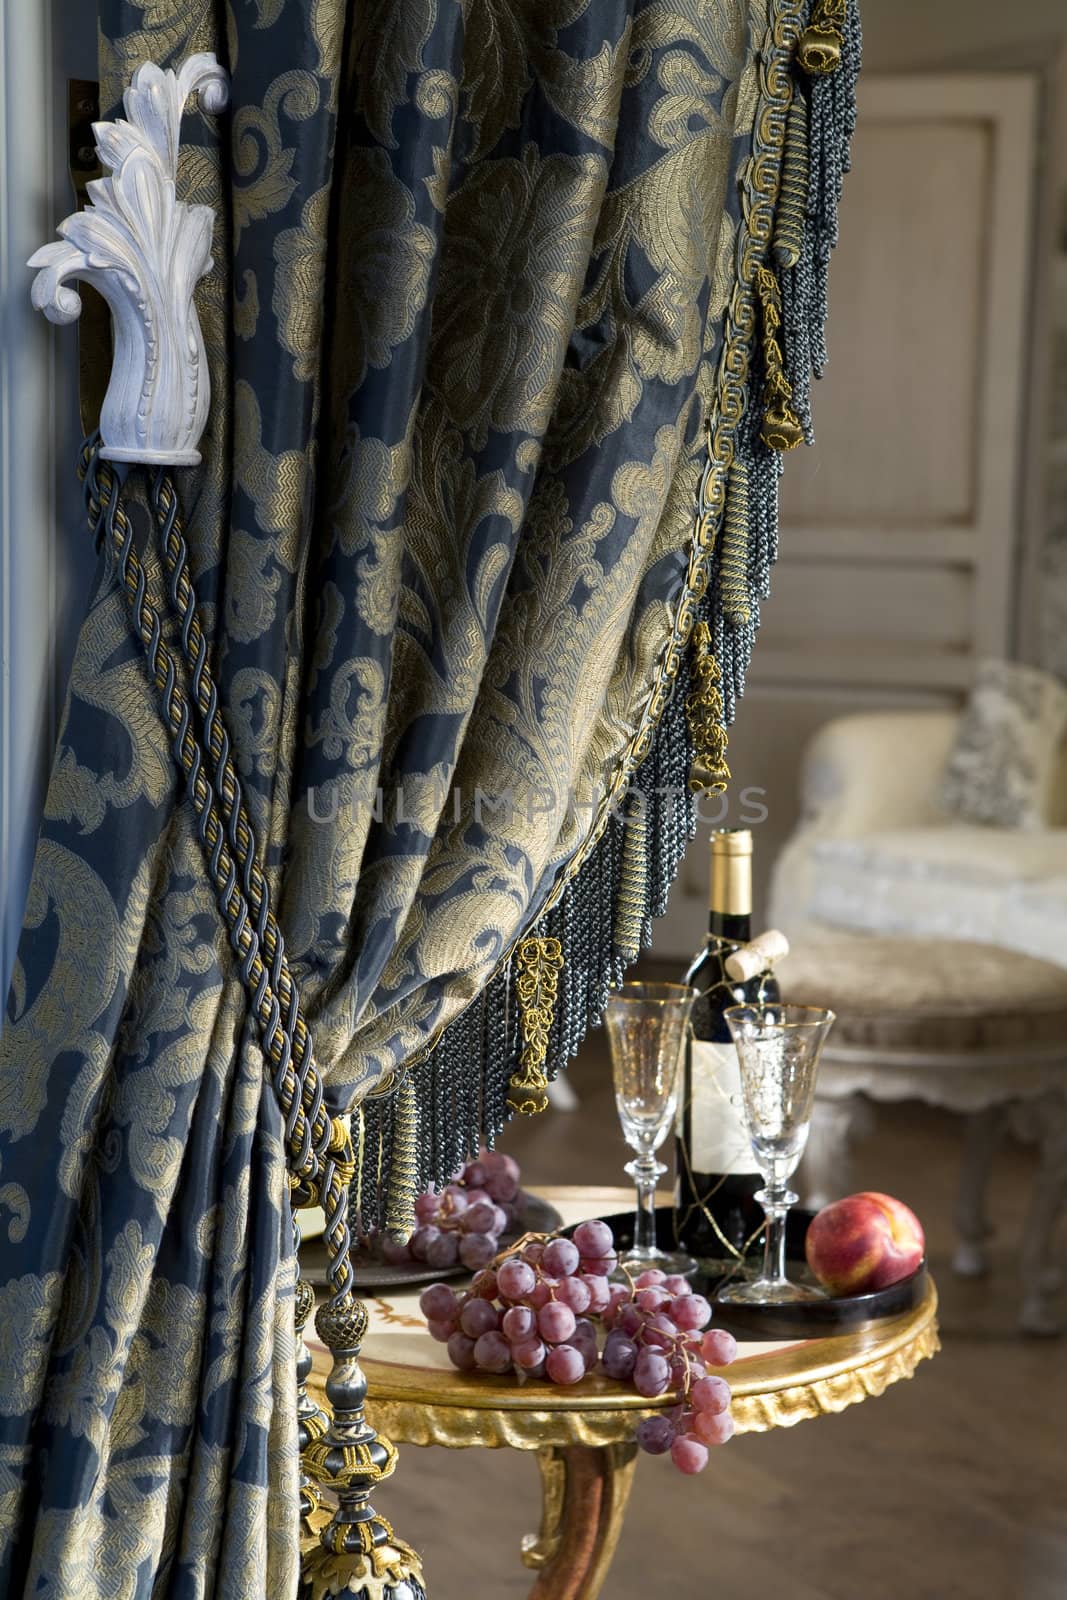 Luxurious curtain from woollen cloth with tassel. Blue and gold. Table with grape. Empire style